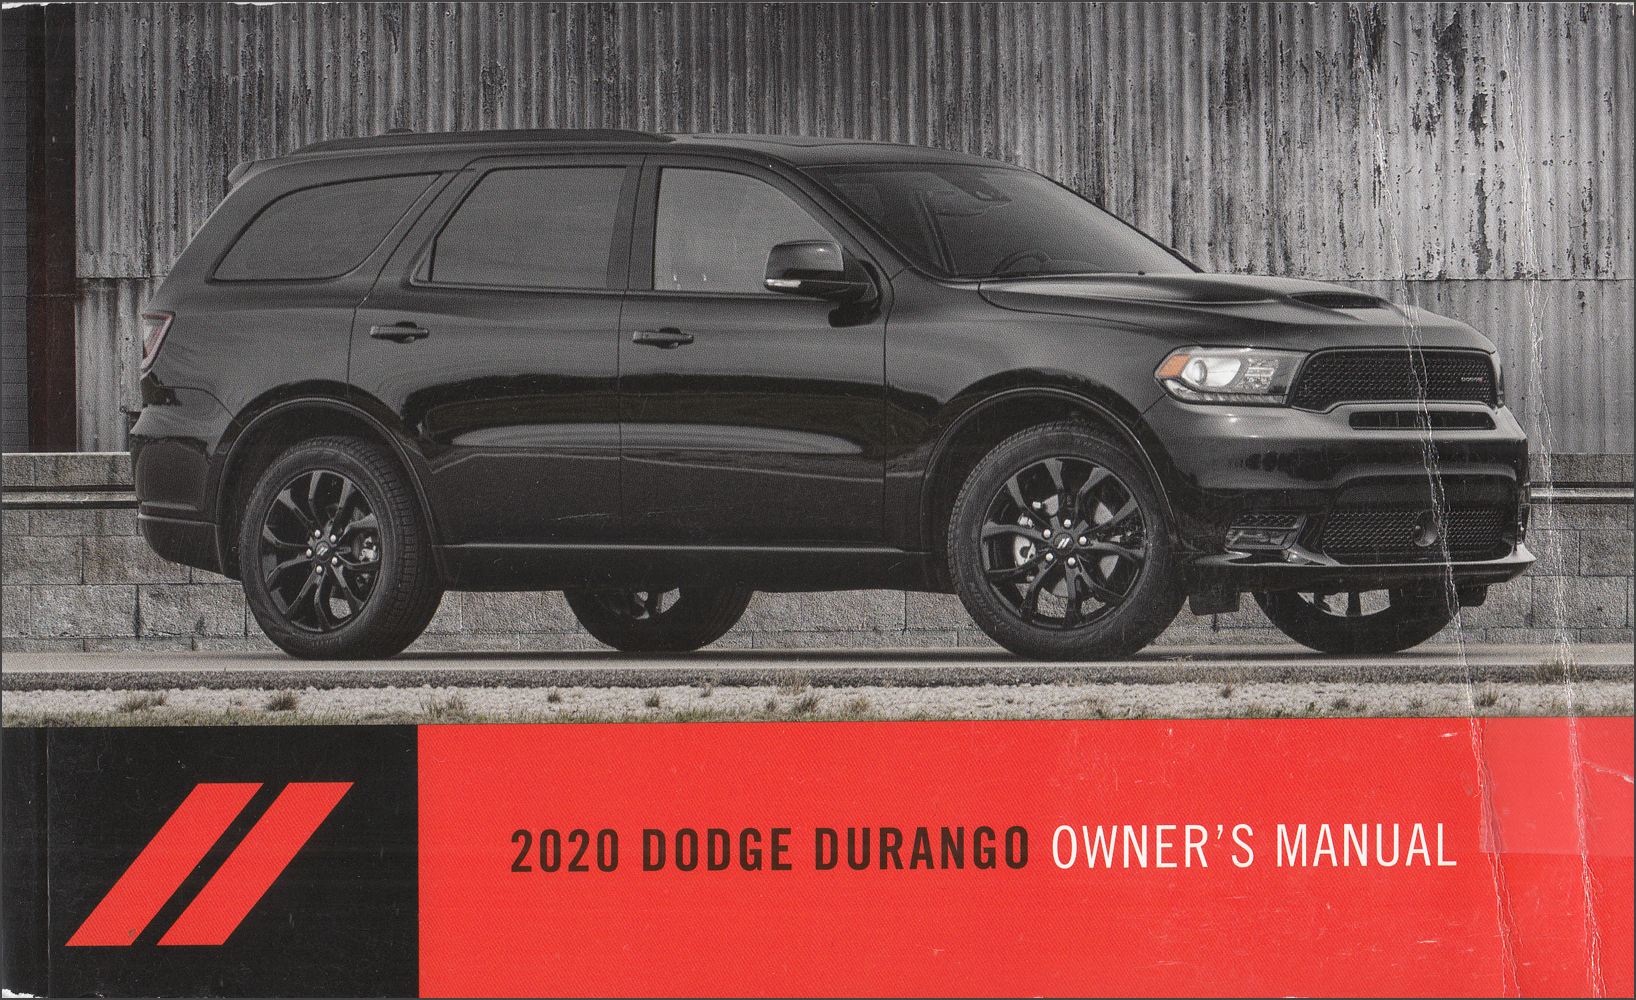 2020 Dodge Durango Owner's Manual Original Extended 457-page version